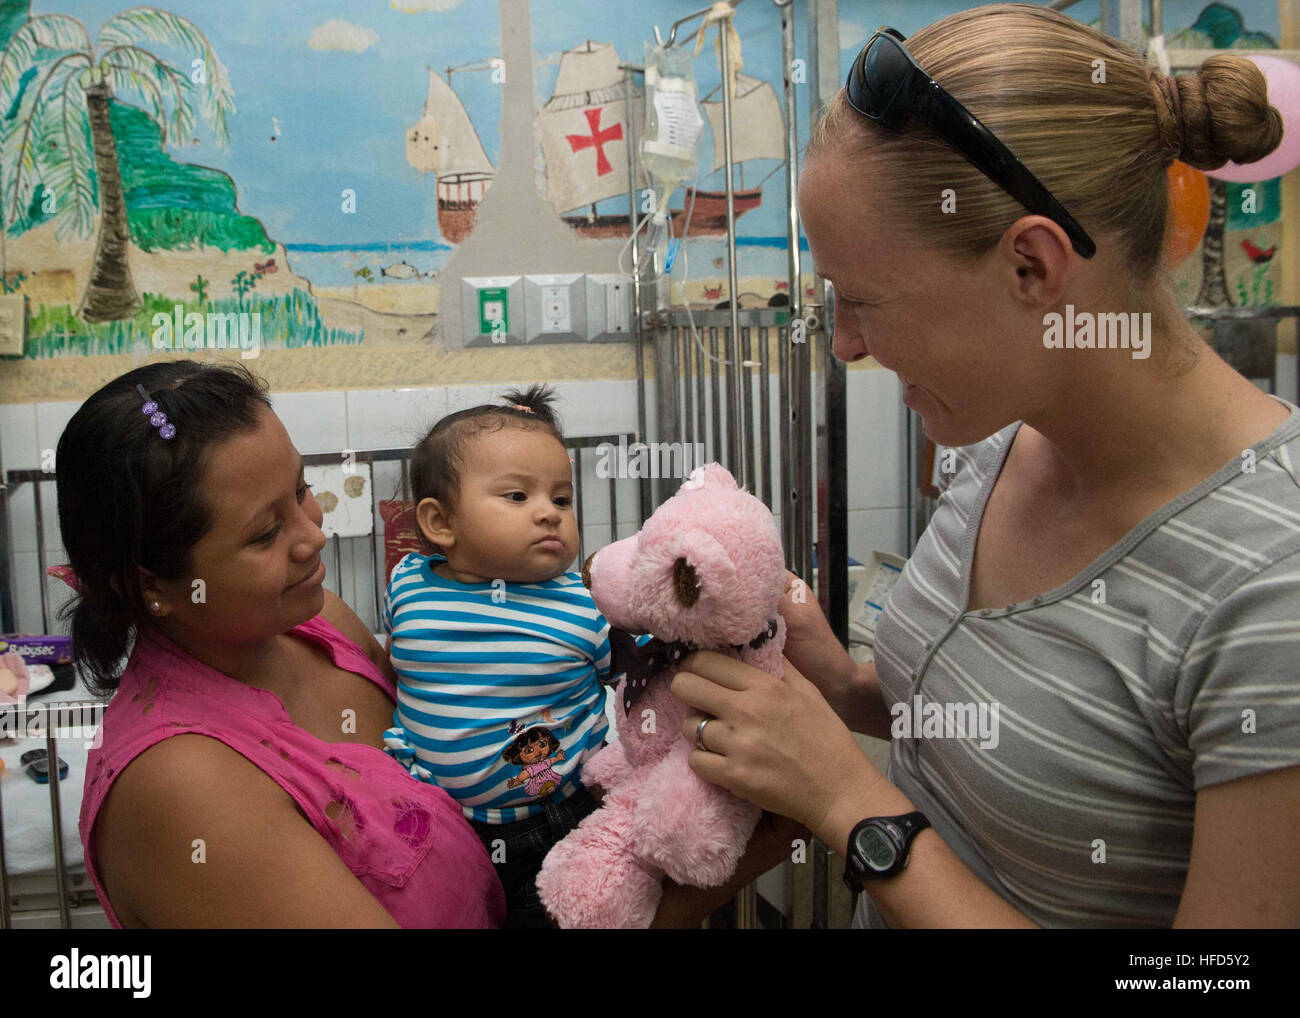 U.S. Navy Lt. Kimberly Herm, gives a teddy bear to an Honduran child at the Hospital Dr. Salvador Paredes pediatric ward during Southern Partnership Station 2014 (SPS-JHSV 14). Southern Partnership Station 2014 is a U.S. Navy deployment focused on subject matter expert exchanges with partner nation militaries and security forces. U.S. Naval Forces Southern Command and U.S. 4th Fleet employ maritime forces in cooperative maritime security operations in order to maintain access, enhance interoperability, and build enduring partnerships that foster regional security in the U.S. Southern Command a Stock Photo